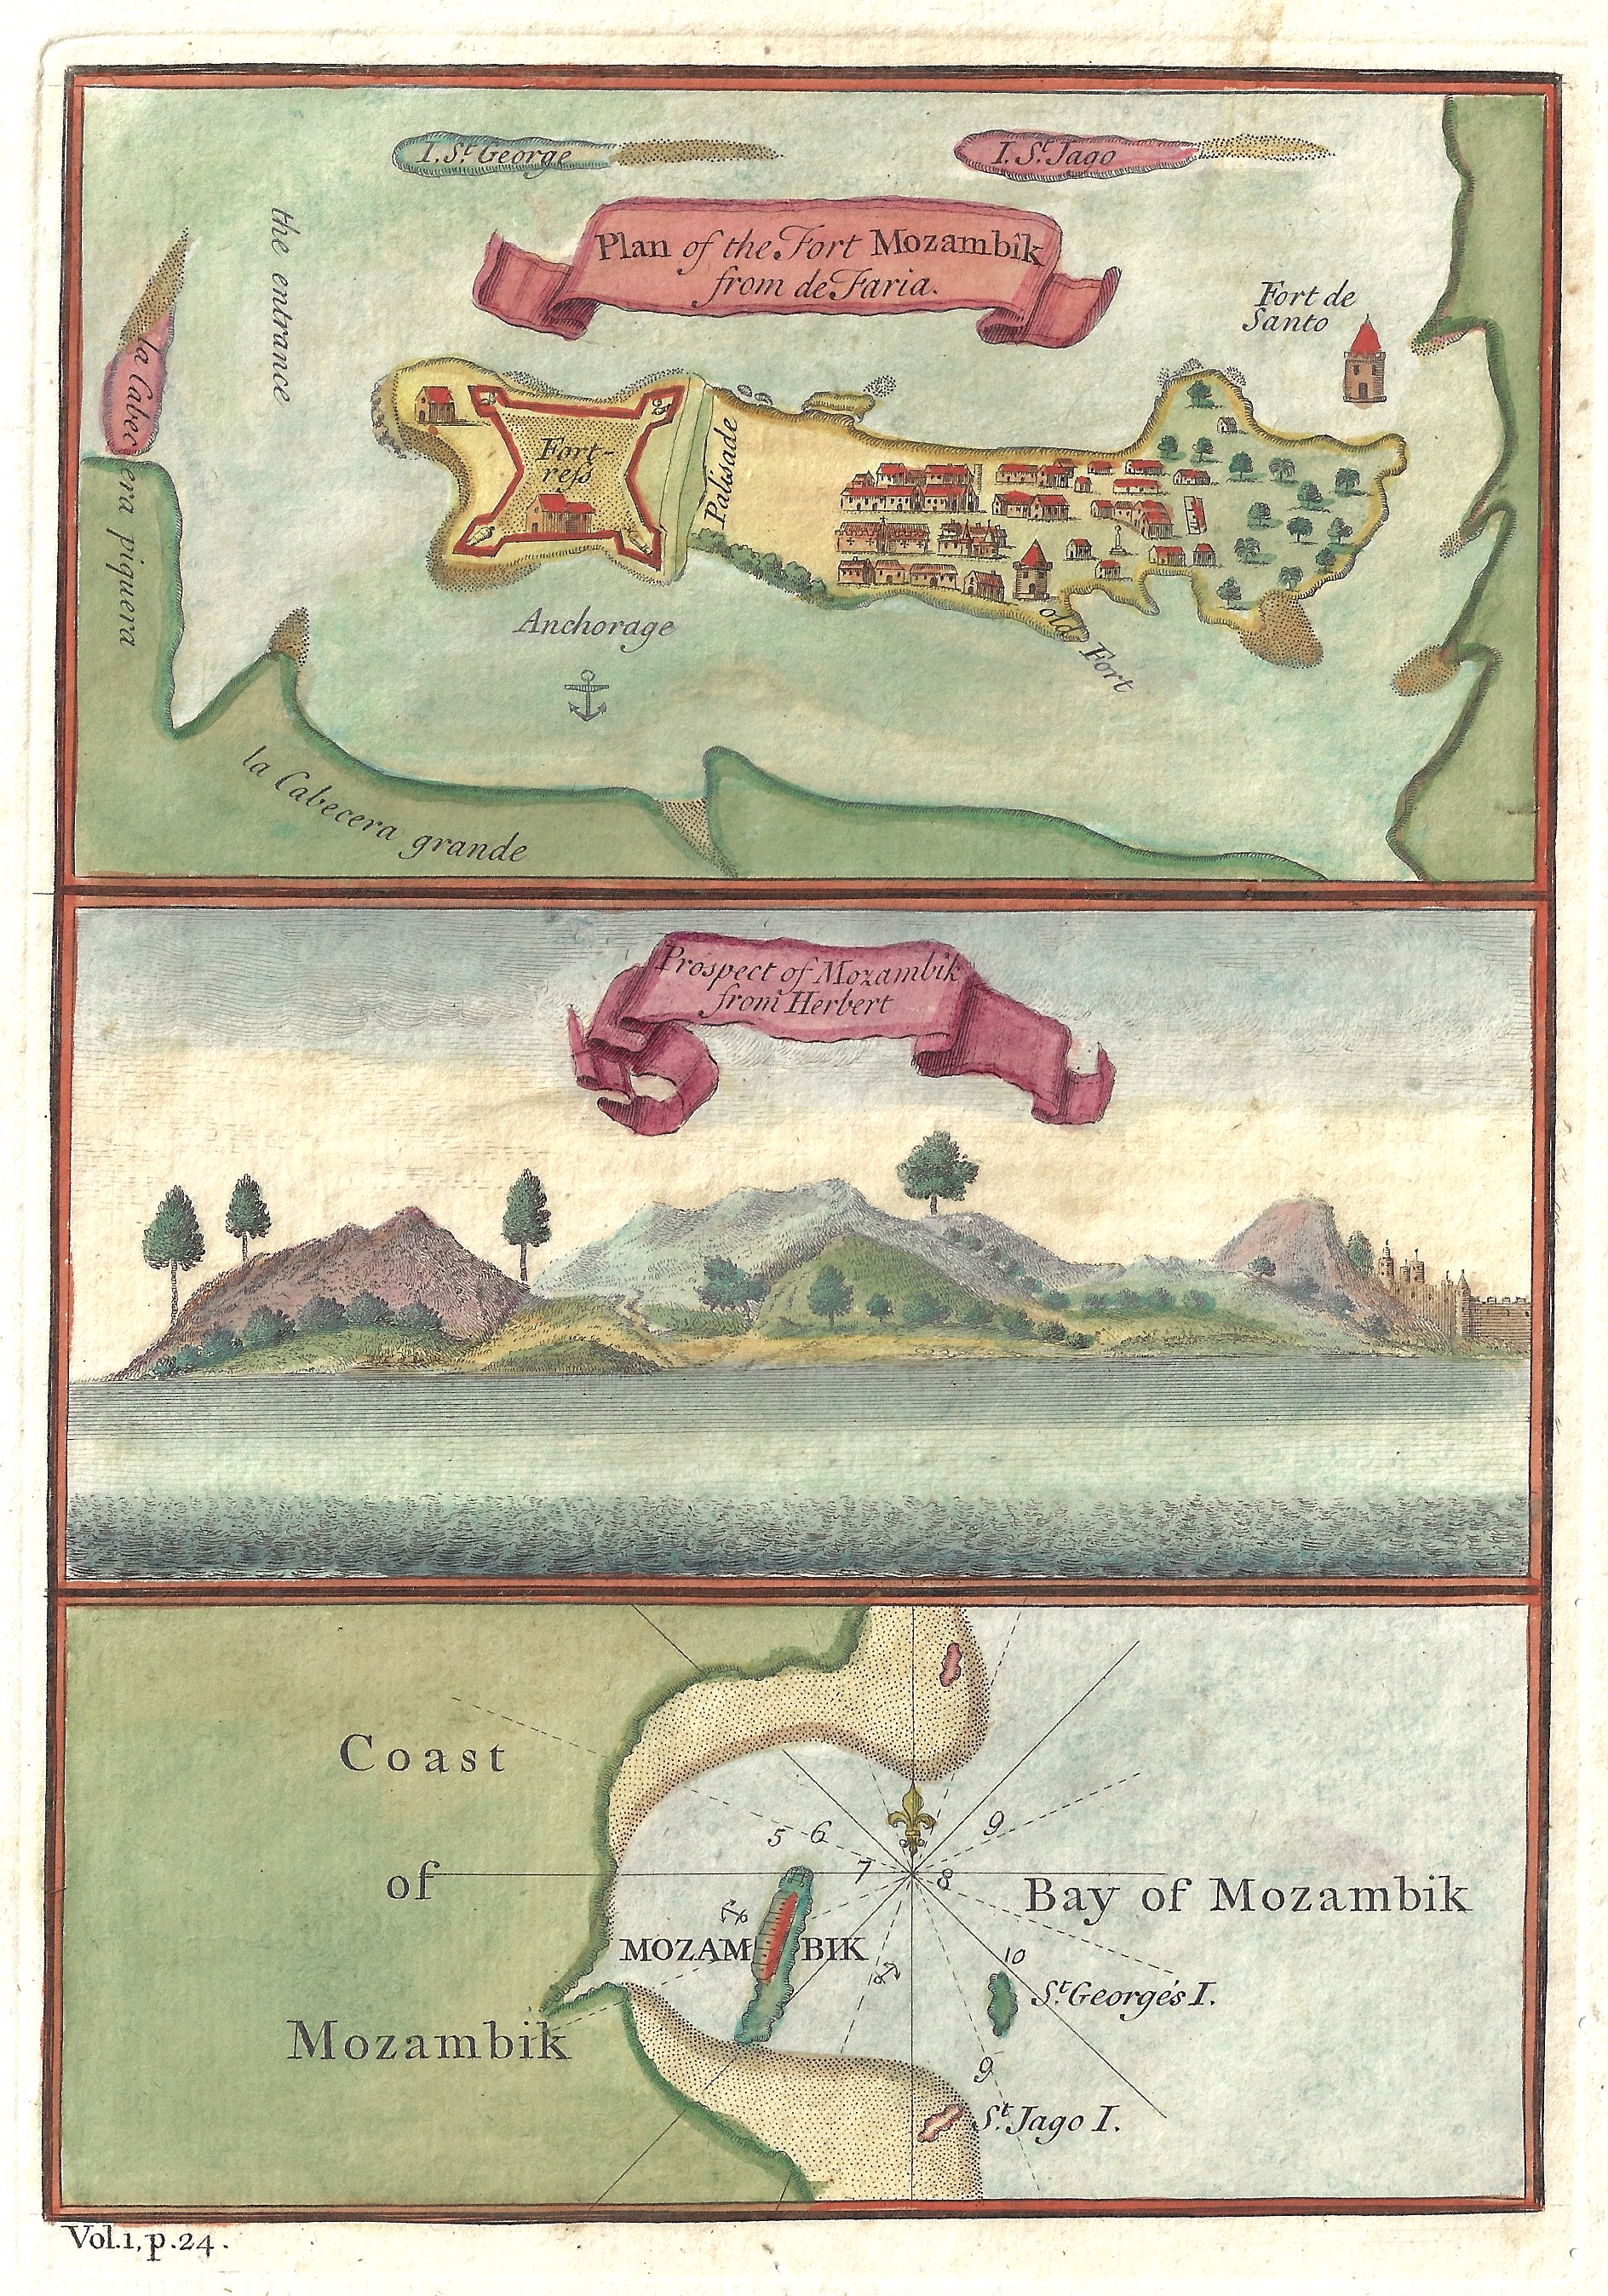 Anonymus  Plan of the Fort Mozambik from de Faria. Prospect of Mozambik Froni Herbert